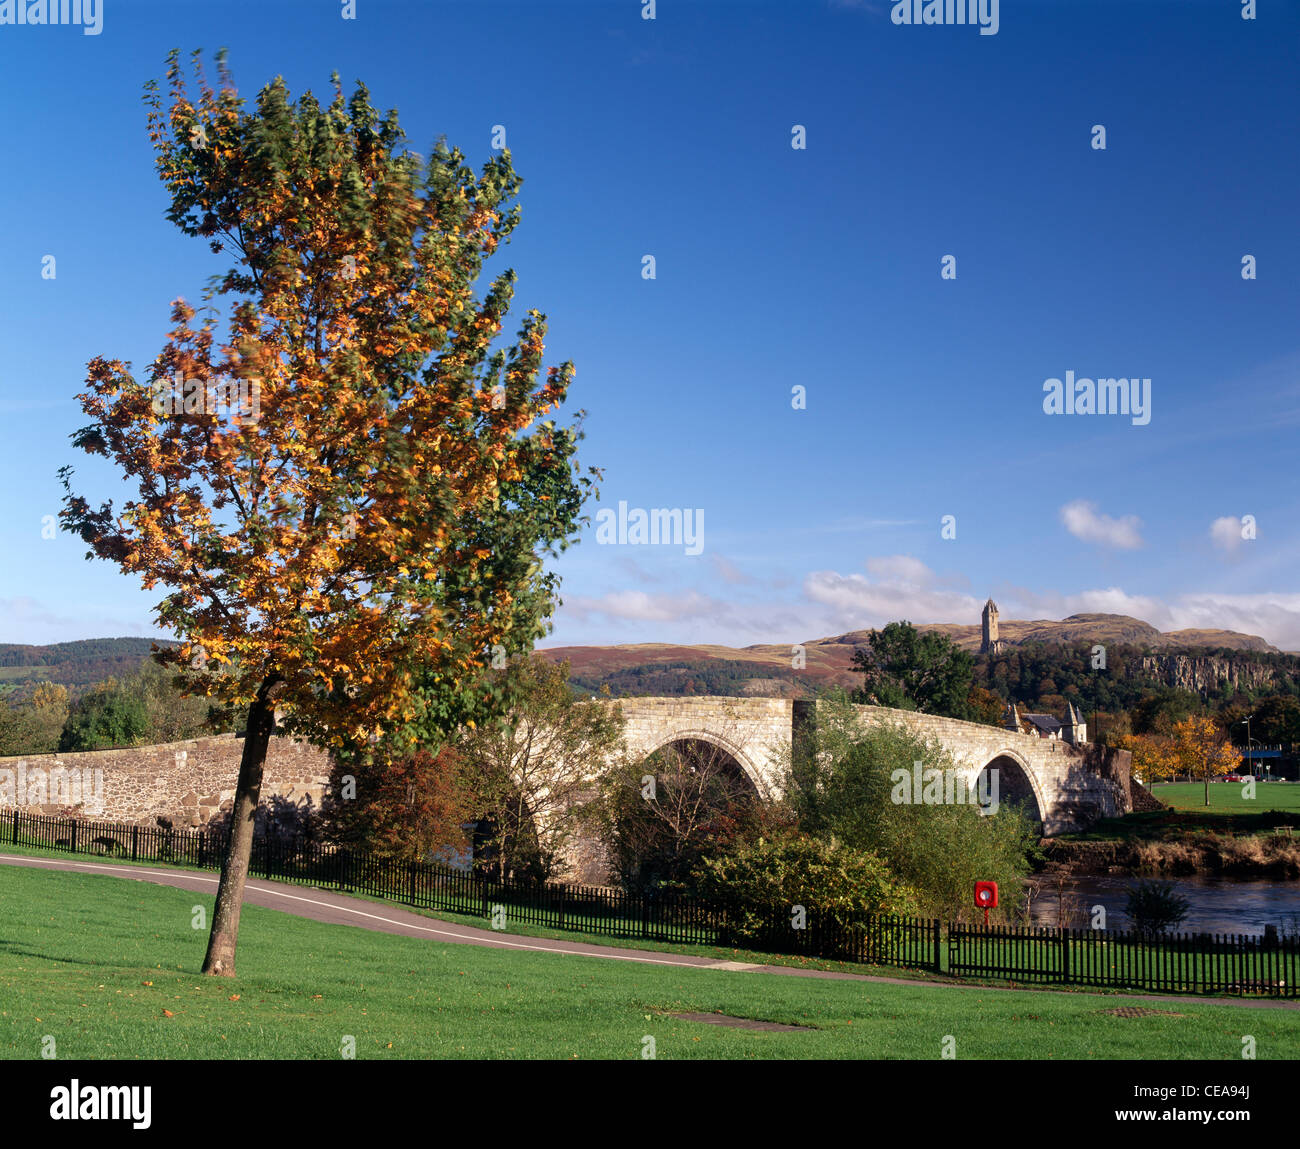 Stirling Bridge (Auld Brig), City of Stirling, Scotland, UK. The Wallace Monument is in the background. Stock Photo